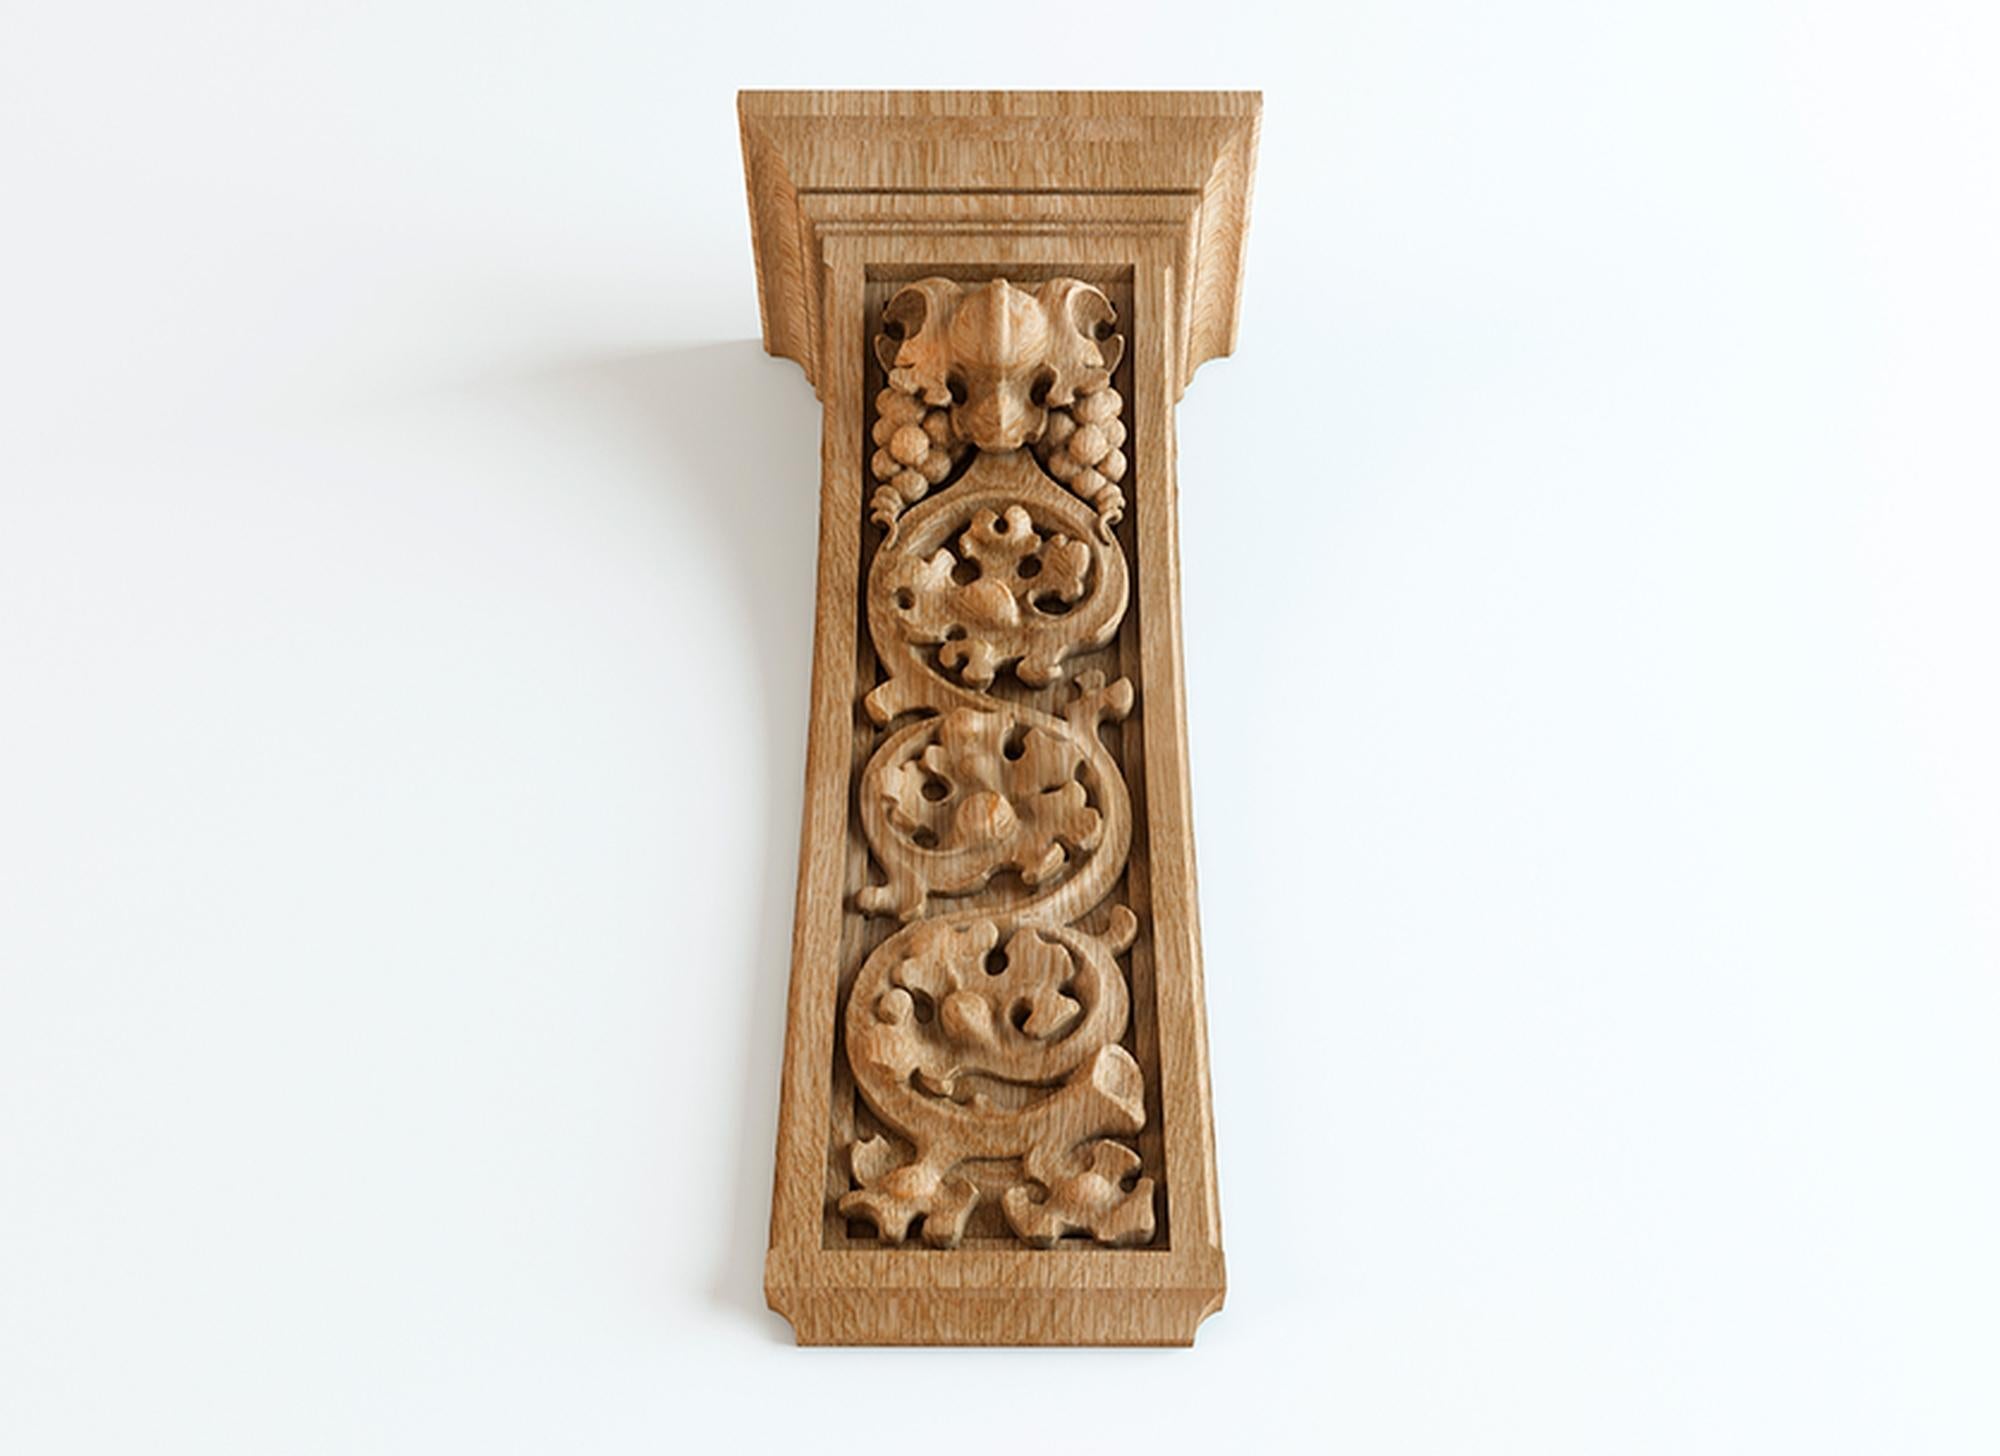 Woodwork Decorative Carved Wood Corbel in Gothic style, Fireplace Surround For Sale